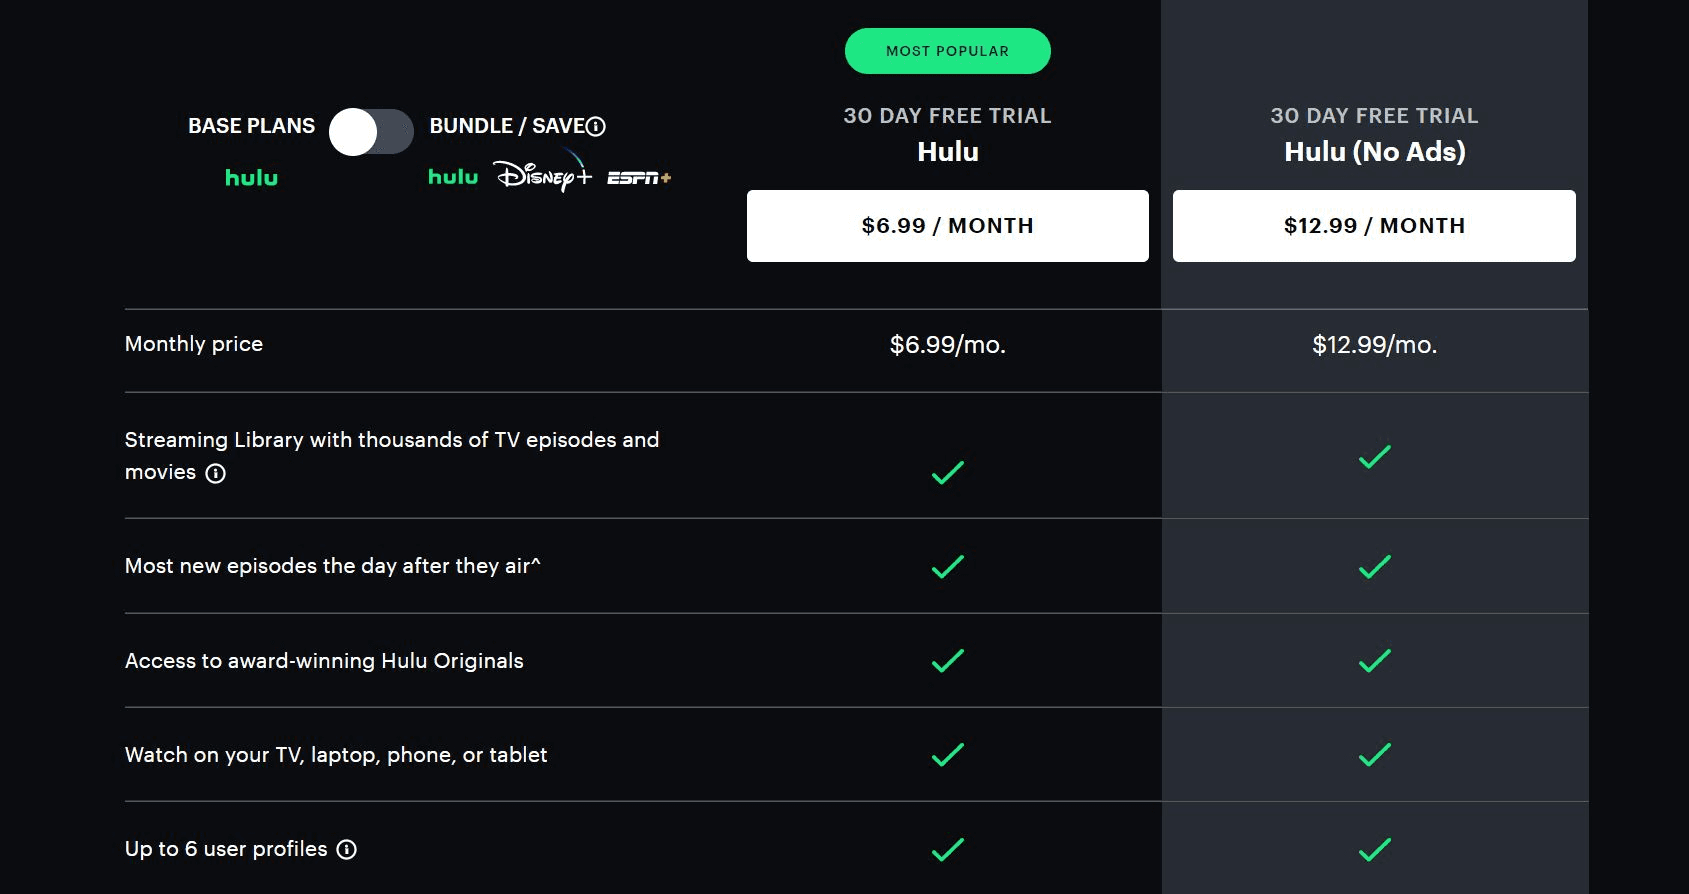 Free Hulu account trial available only on base accounts. Here the costs of a Hulu account and why you might want a free Hulu account.